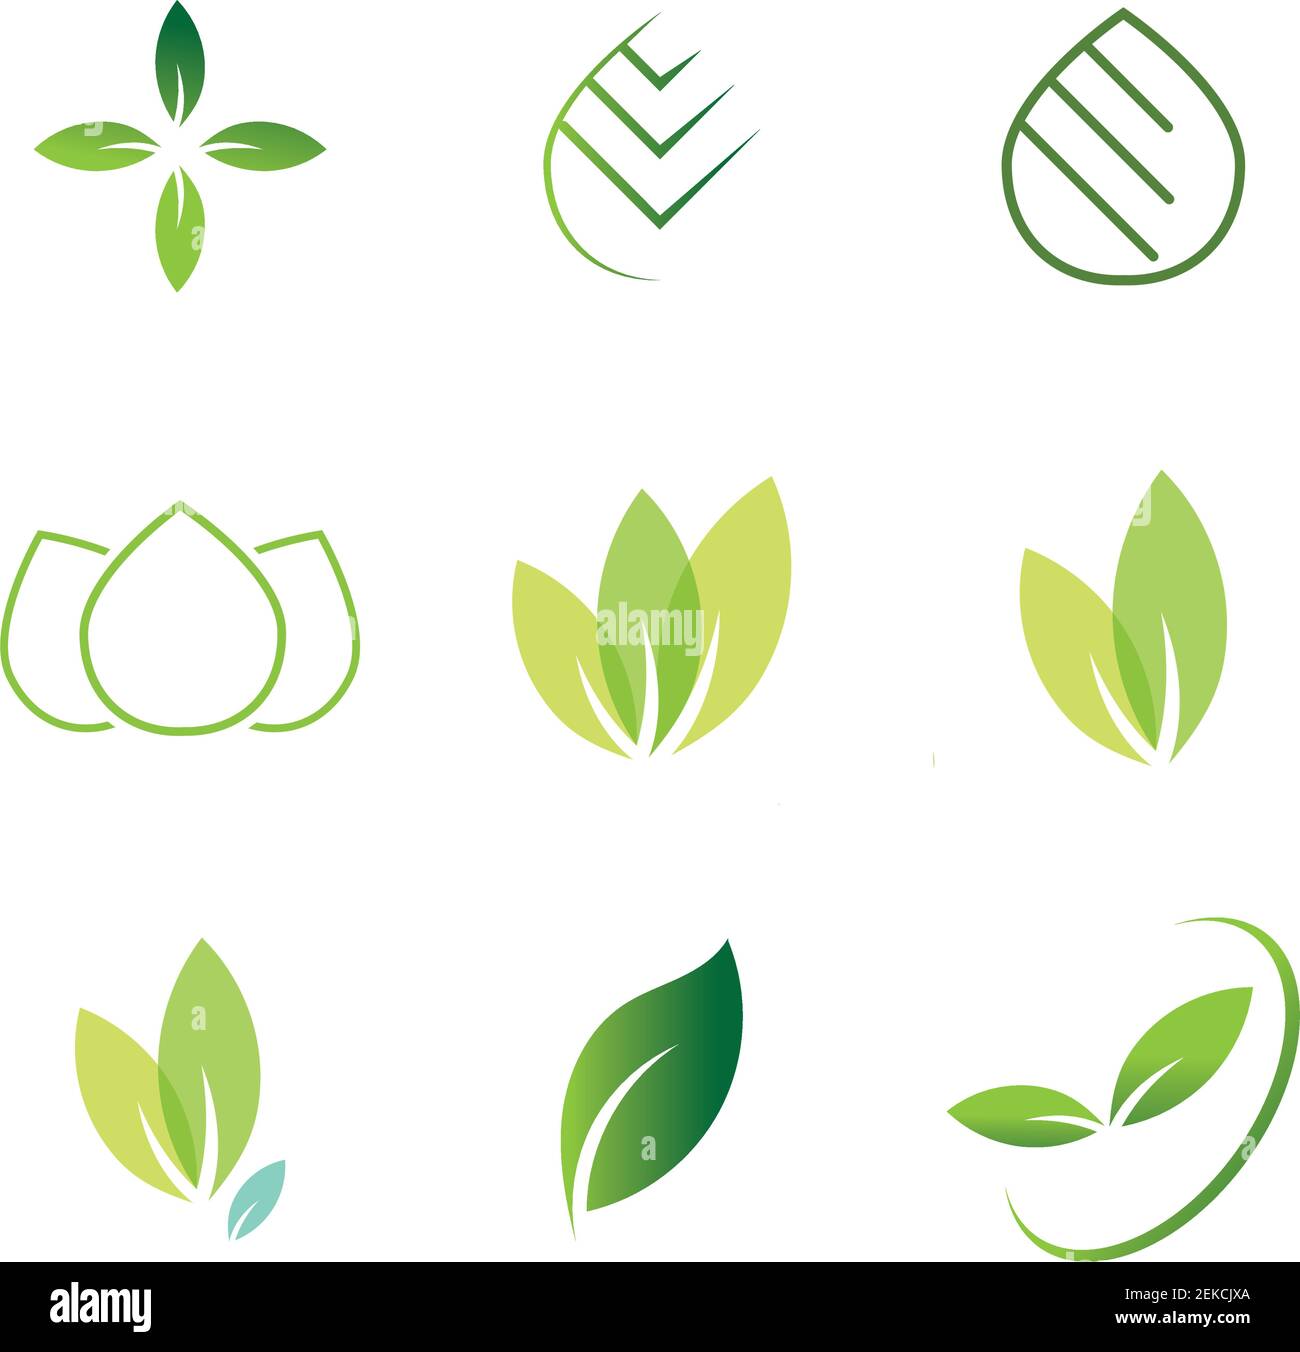 Green Leaf Background Vector Art, Icons, and Graphics for Free